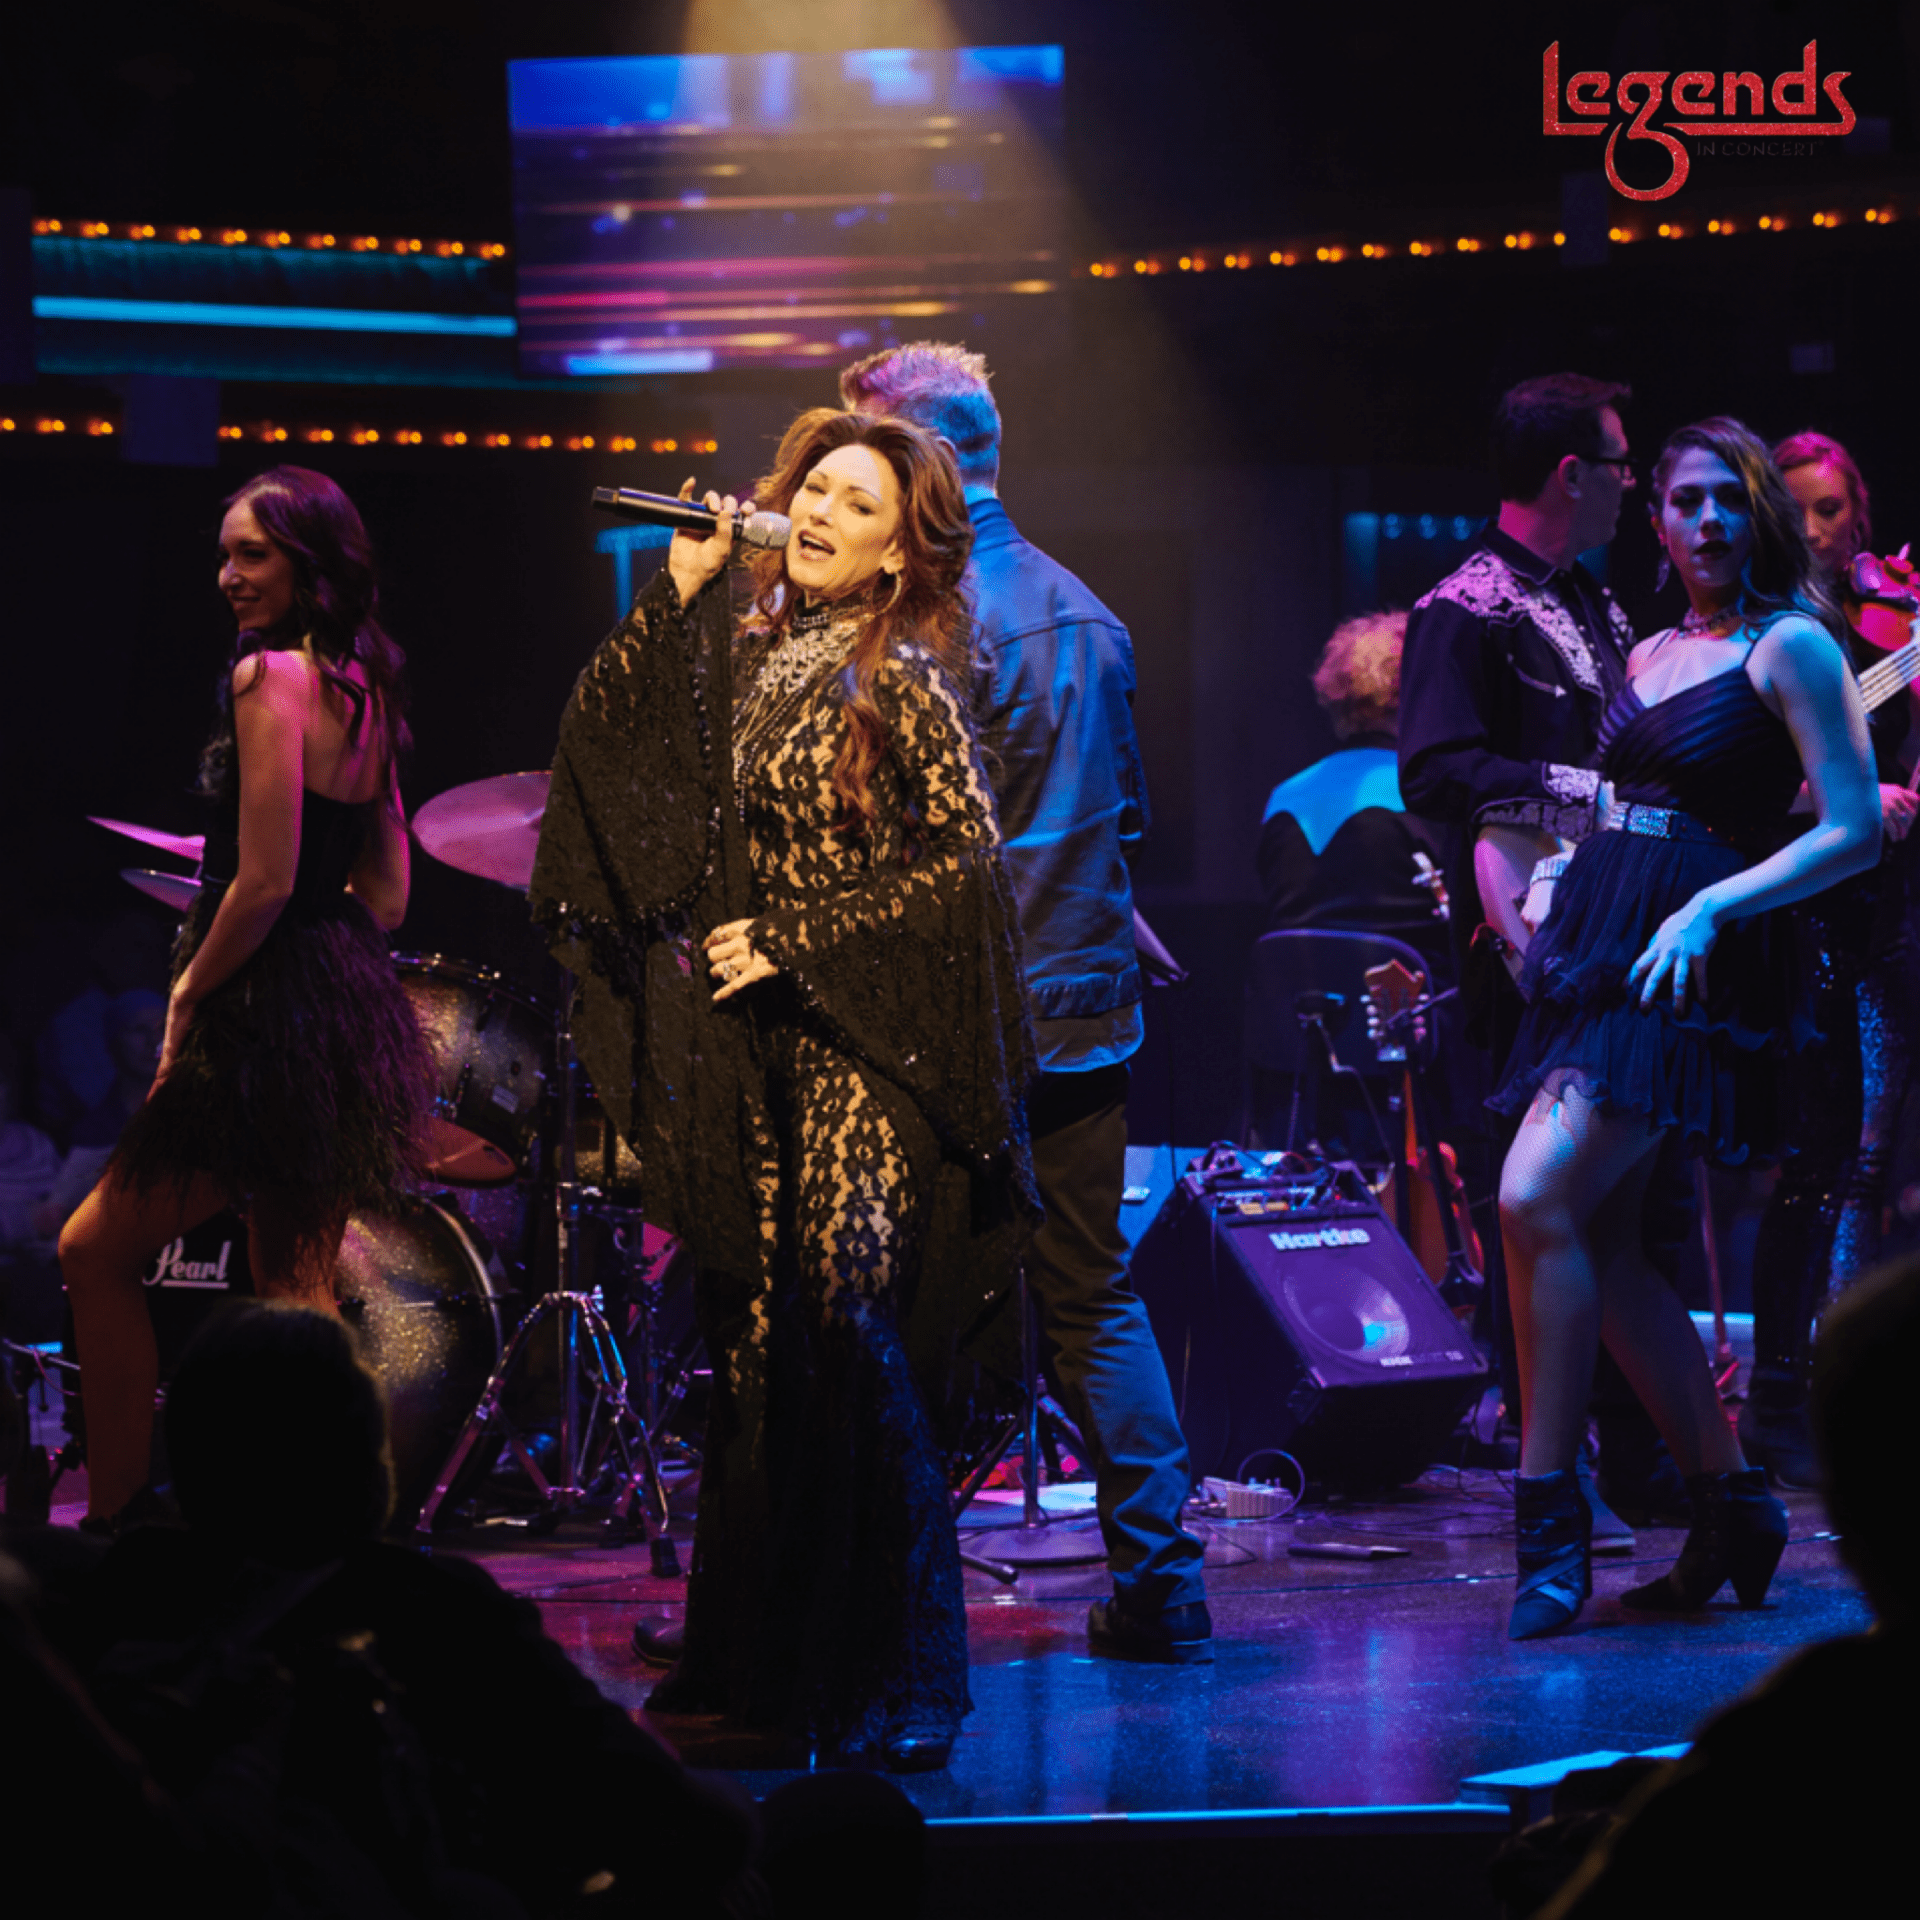 Legends in Concert Stacey Whitton Summers as Shania Twain